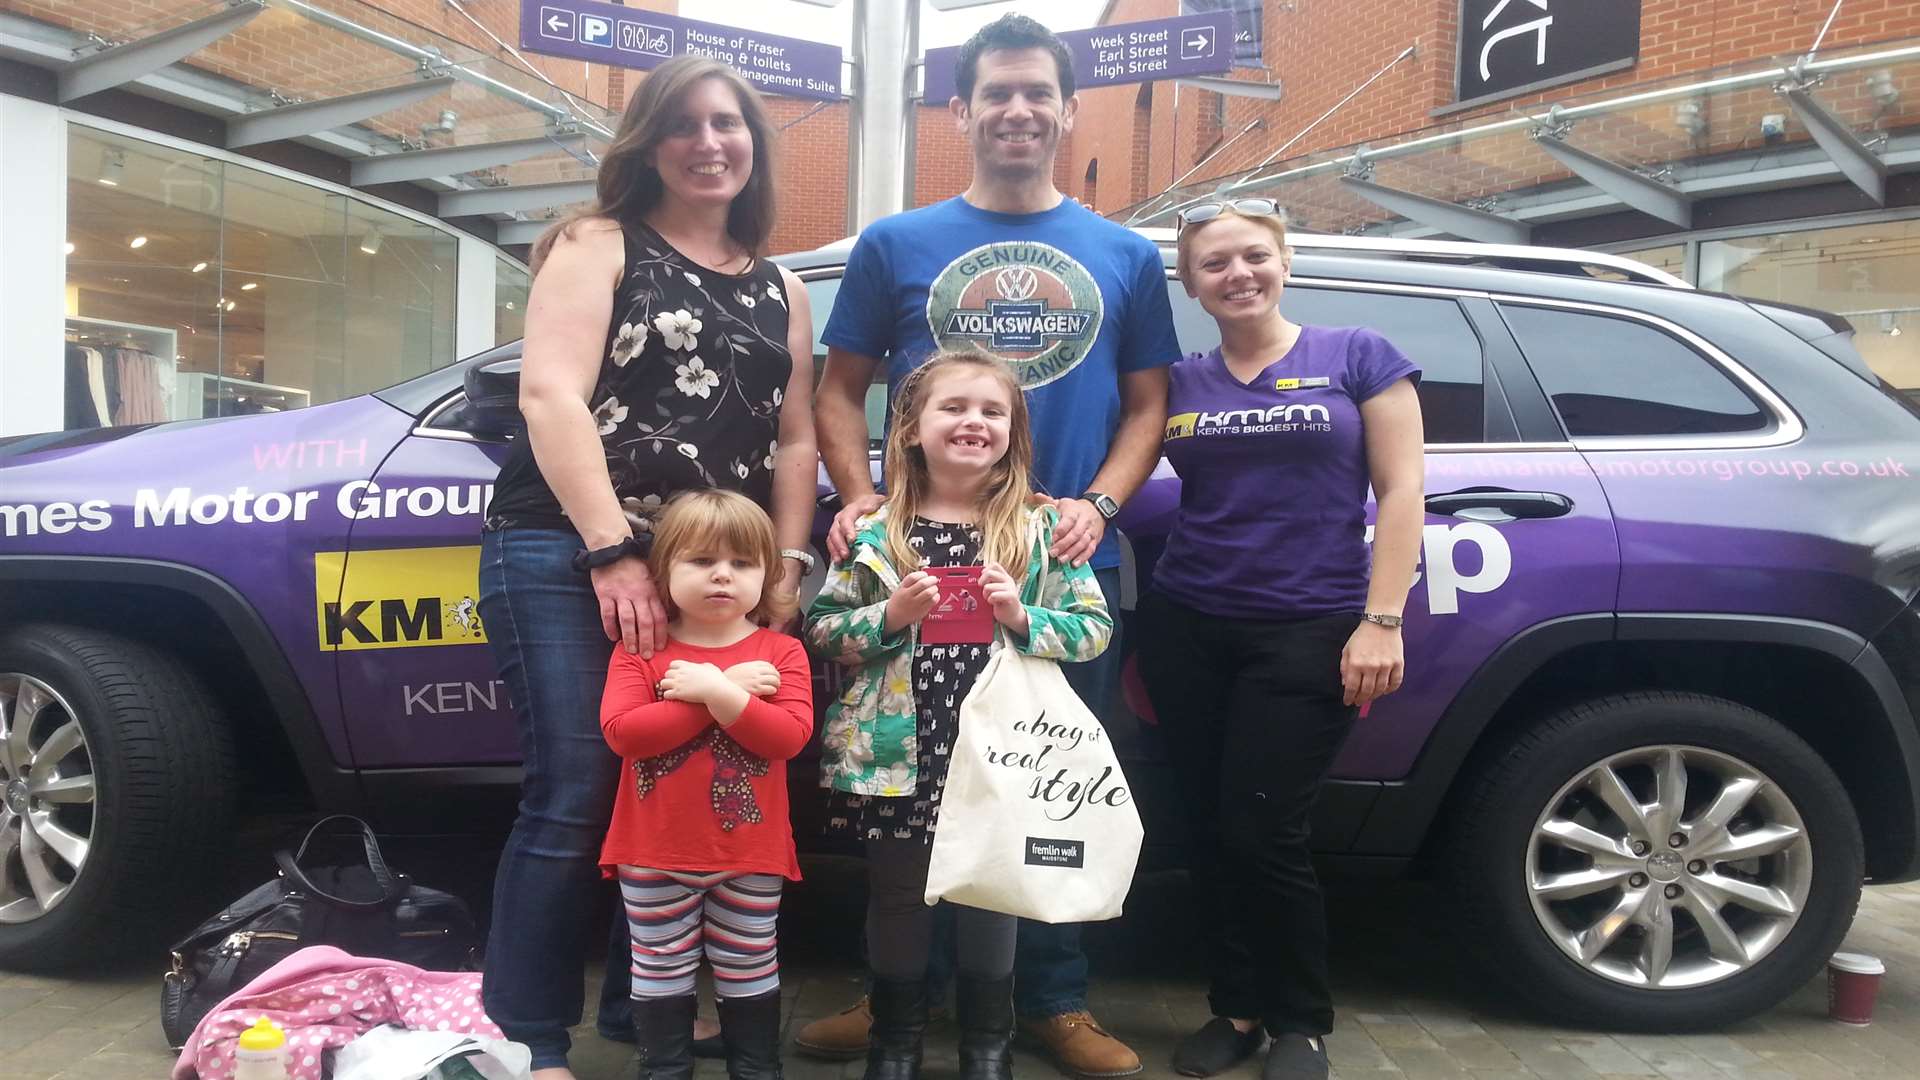 Left to right: Mother Becky Carlisle with father Chris Carlisle and kmfm's Katie Foster. In front are two-year-old Ellie Carlisle and competition winner Amy, aged 5